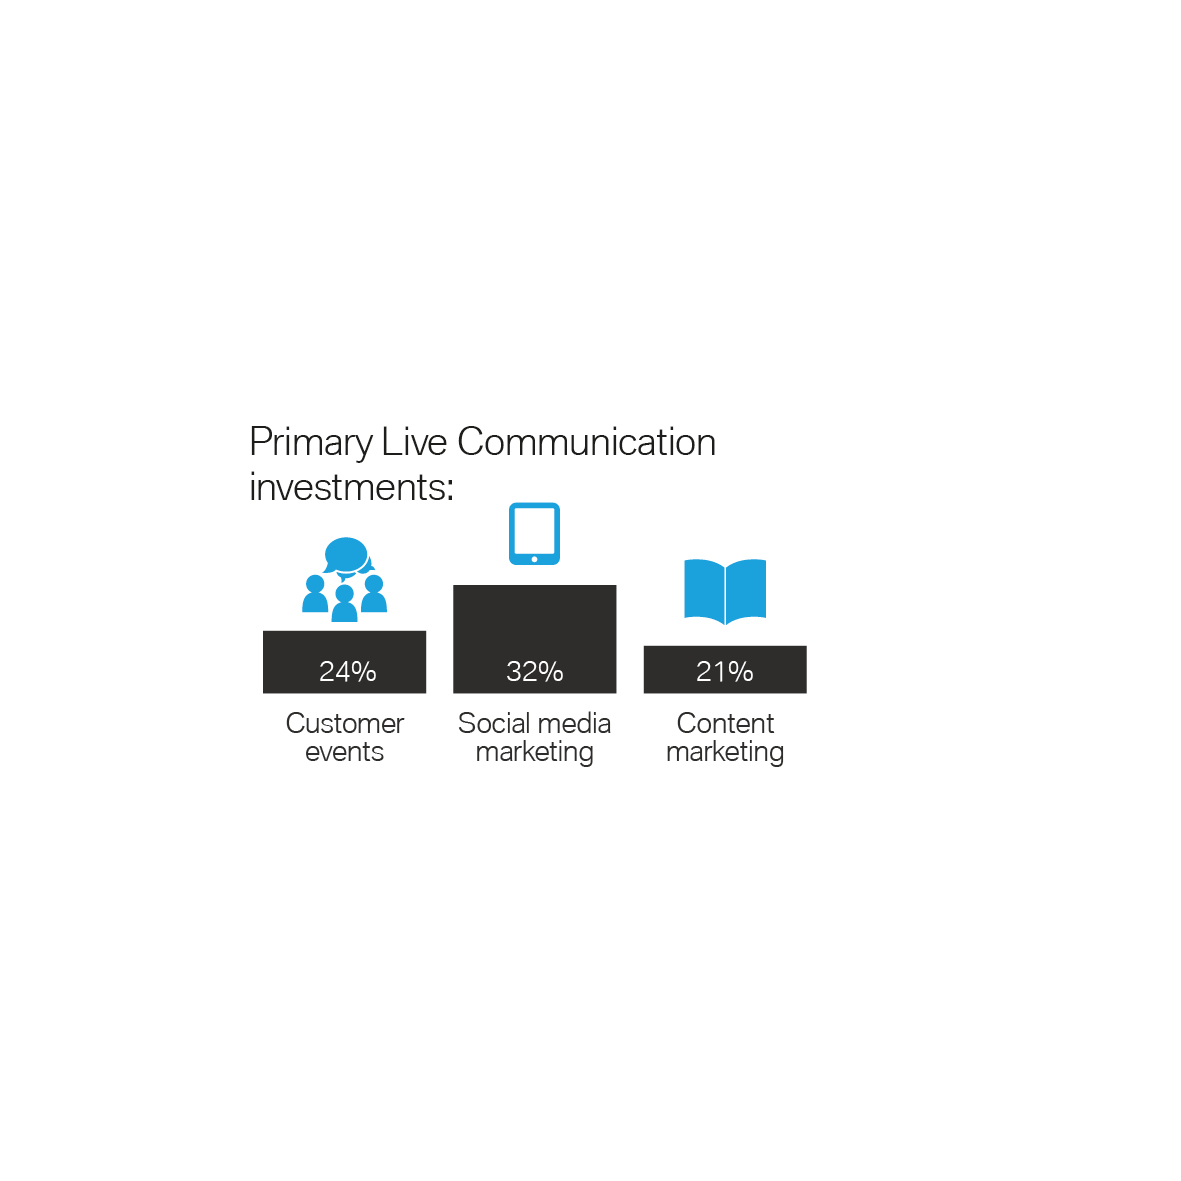 Primary Live Communication investments 